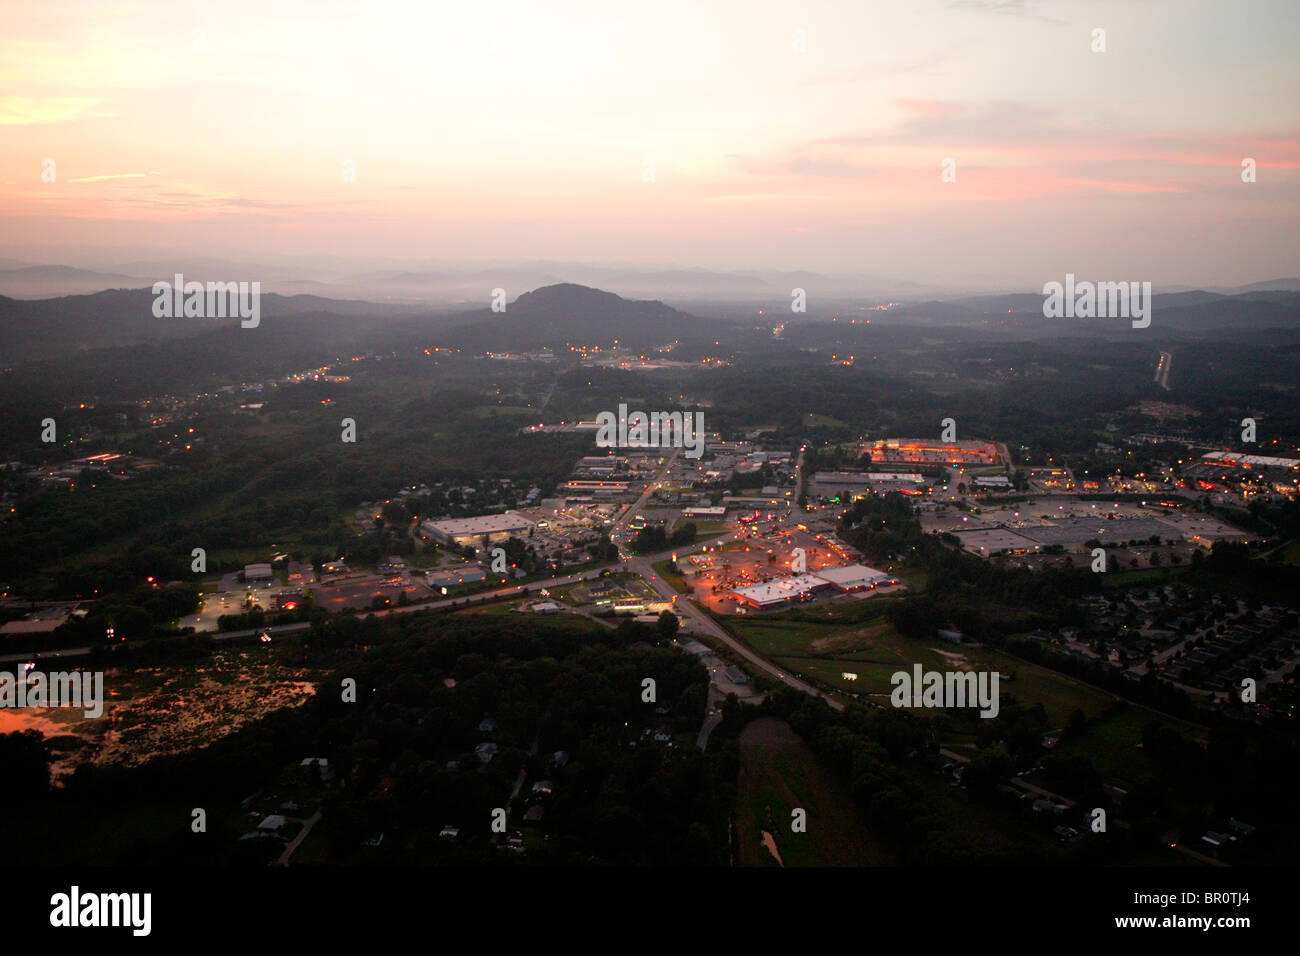 Aerail view of twilight over Hendersonville, NC. Stock Photo